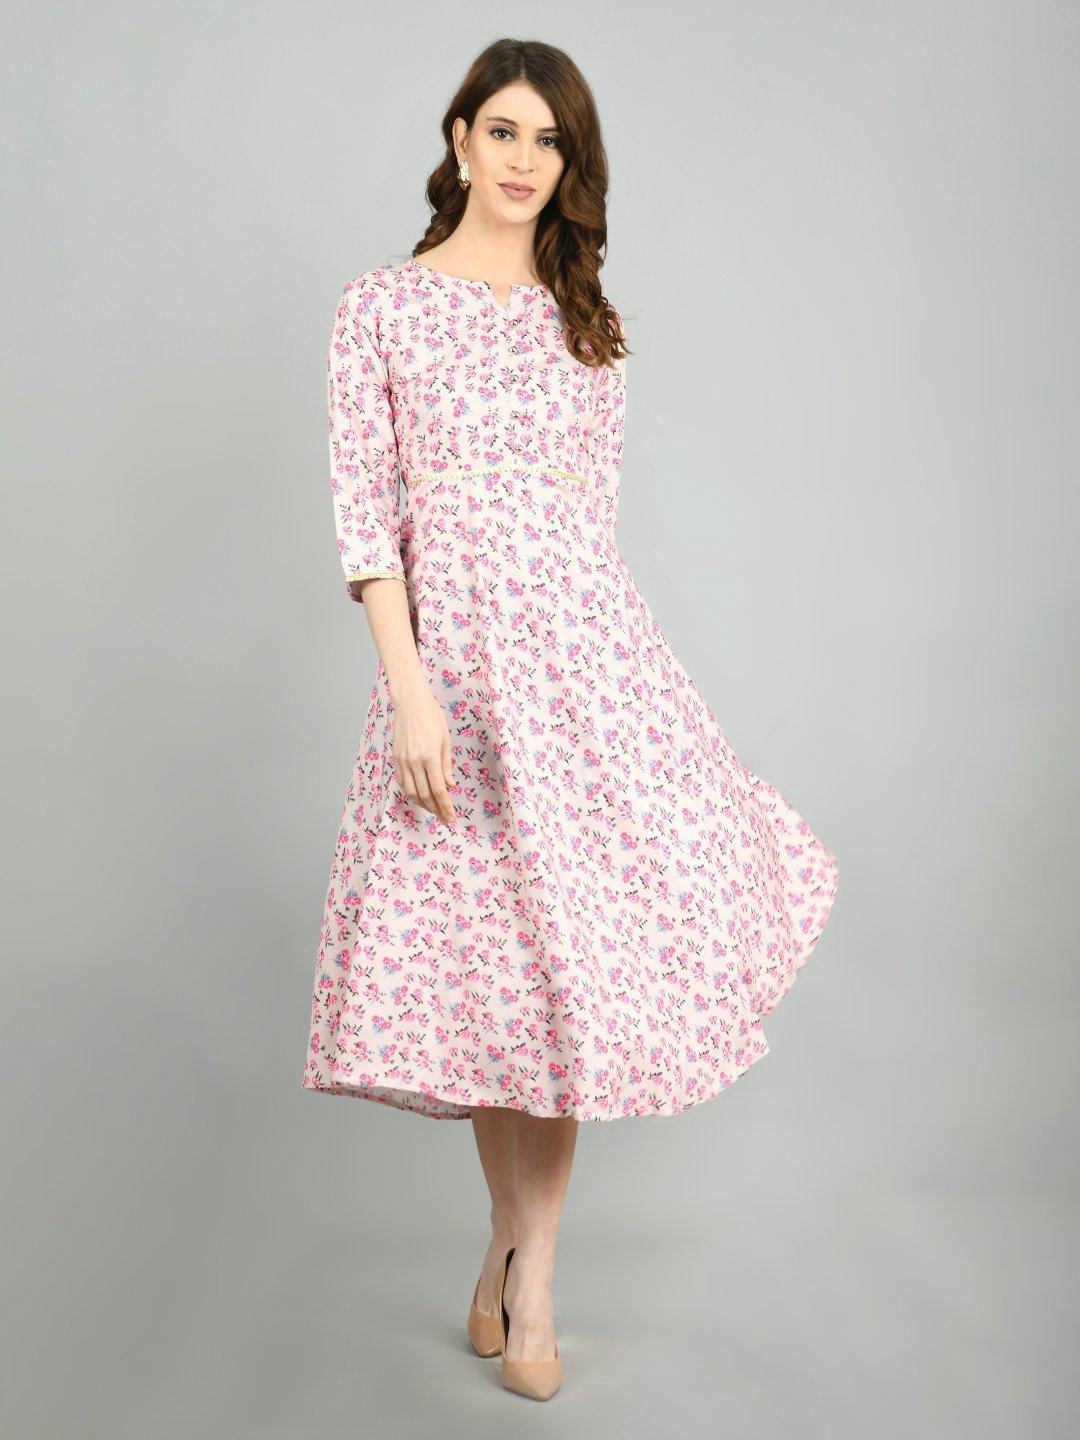 Women's Pink Polyester Printed Casual Dress - Stilento